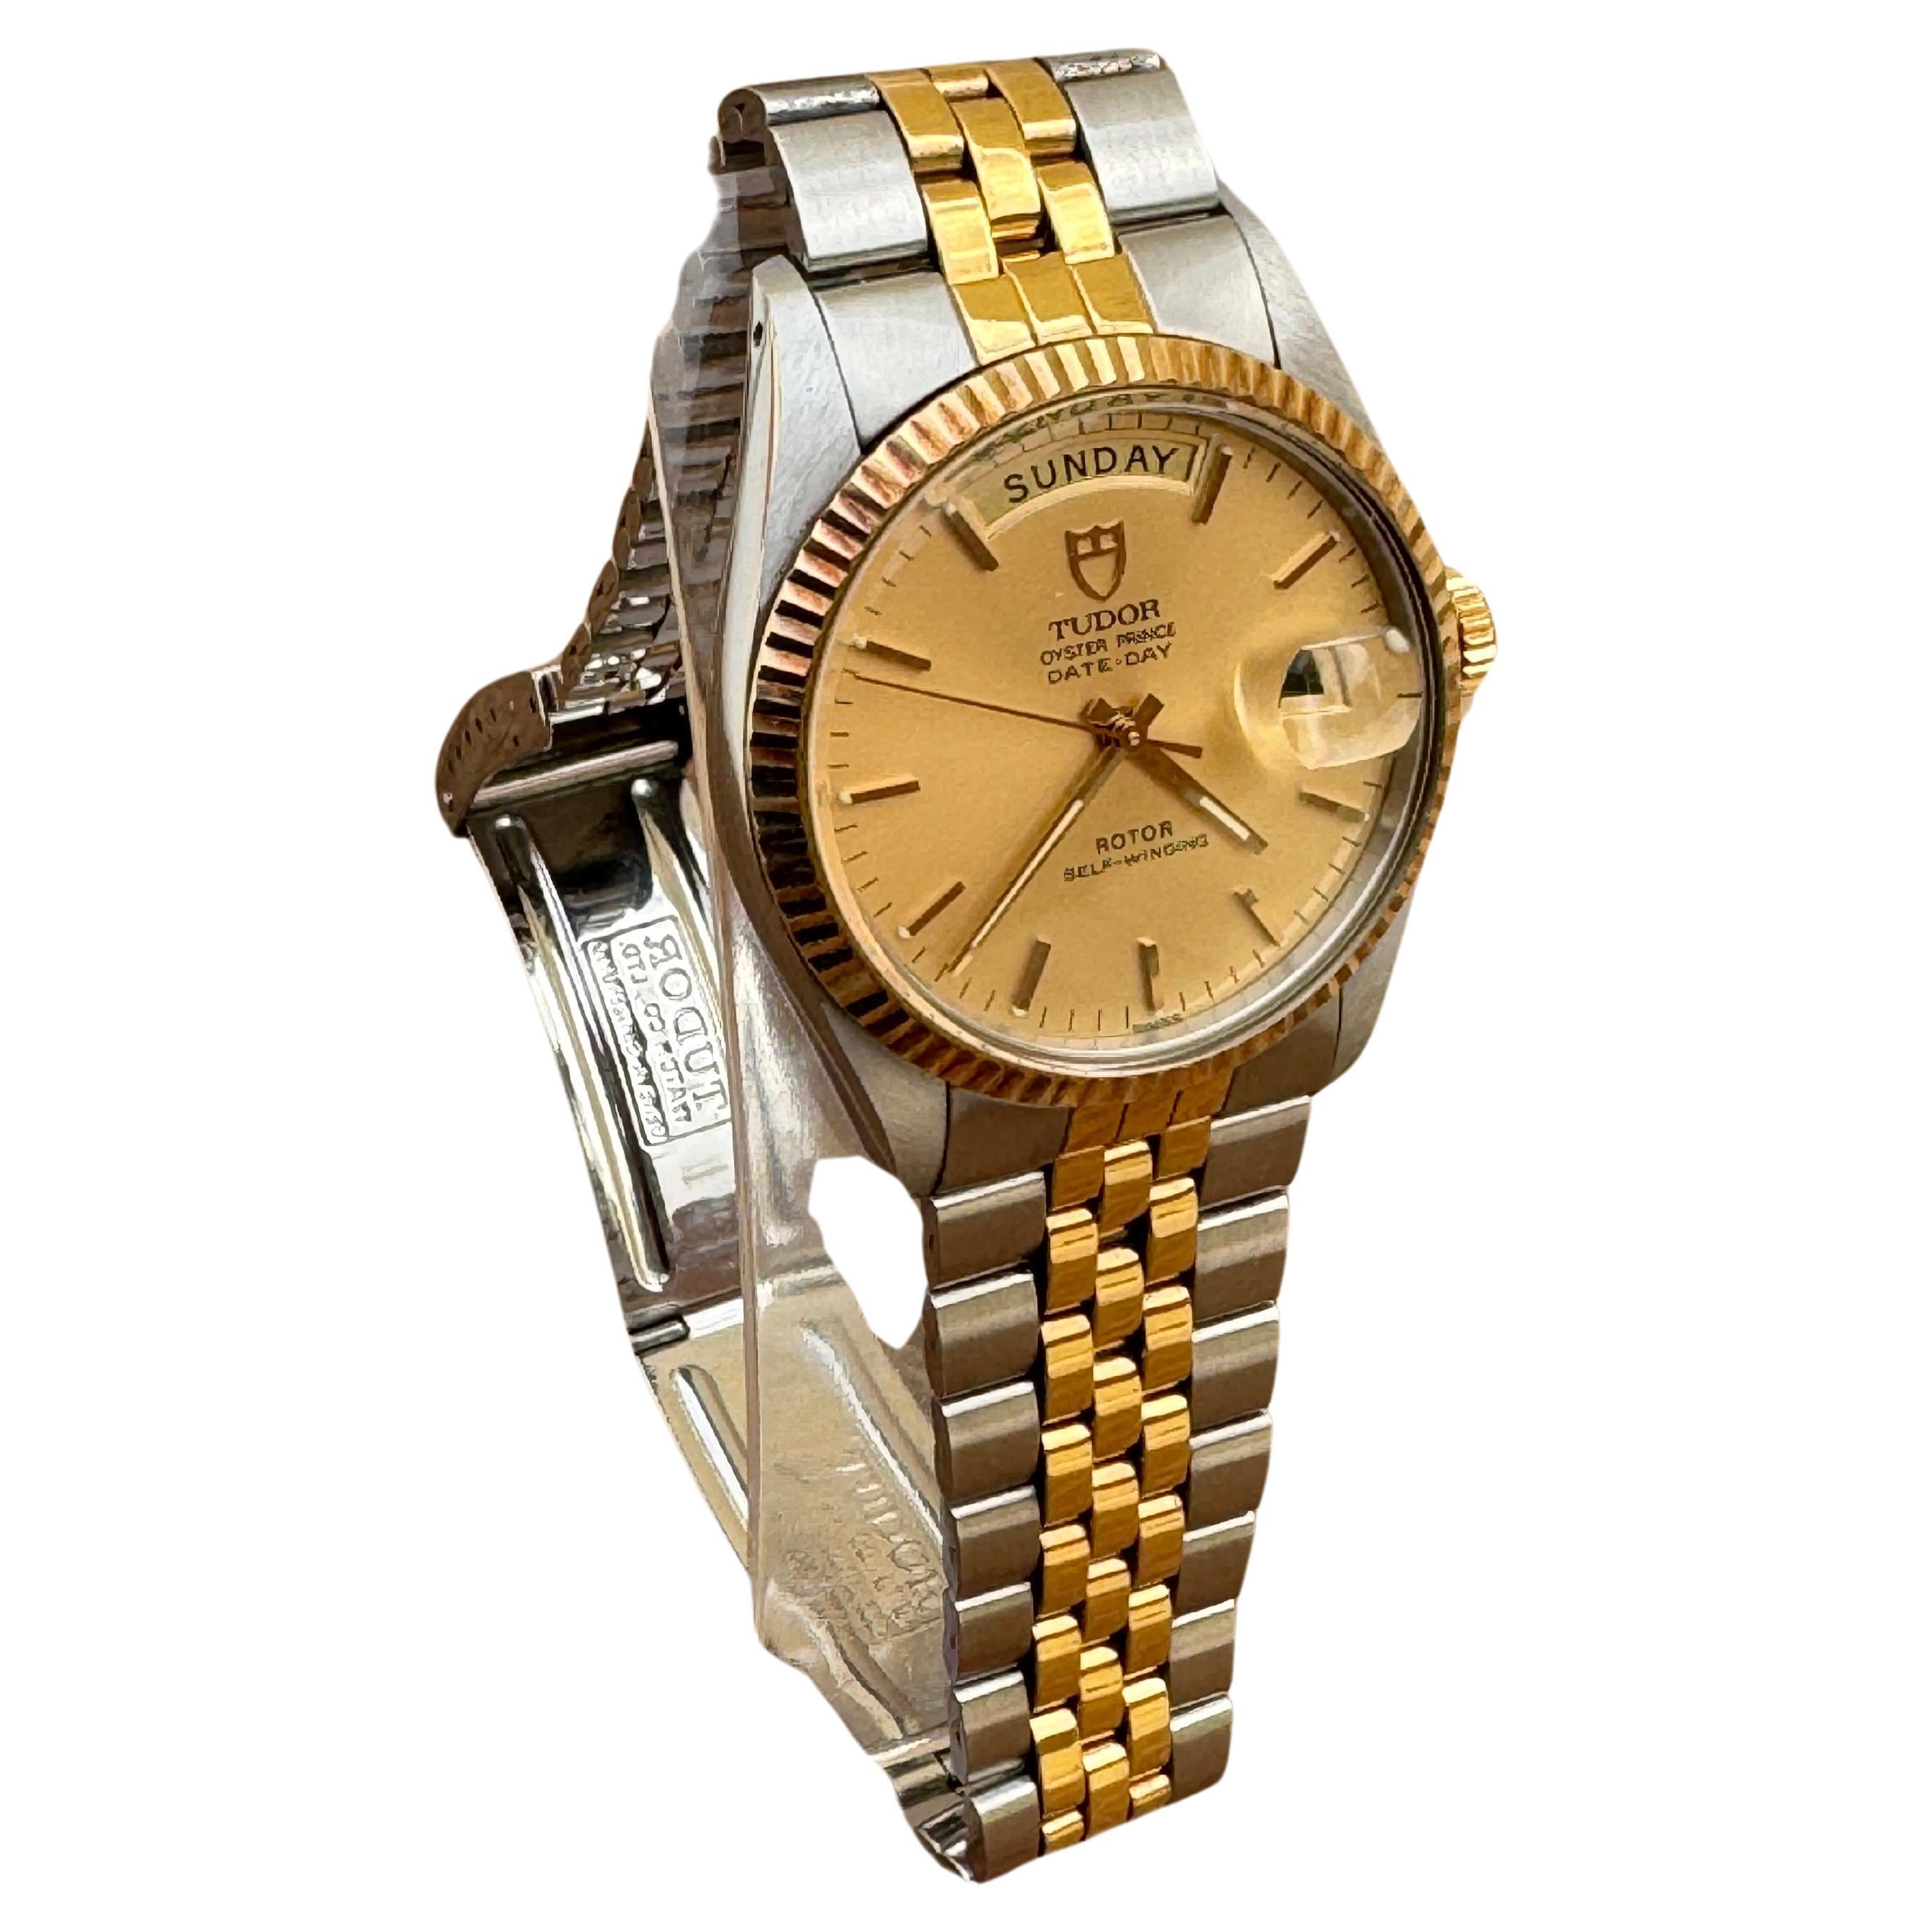 Tudor Prince Date Day 94613 Date Day Gold/Steel Watch For Sale